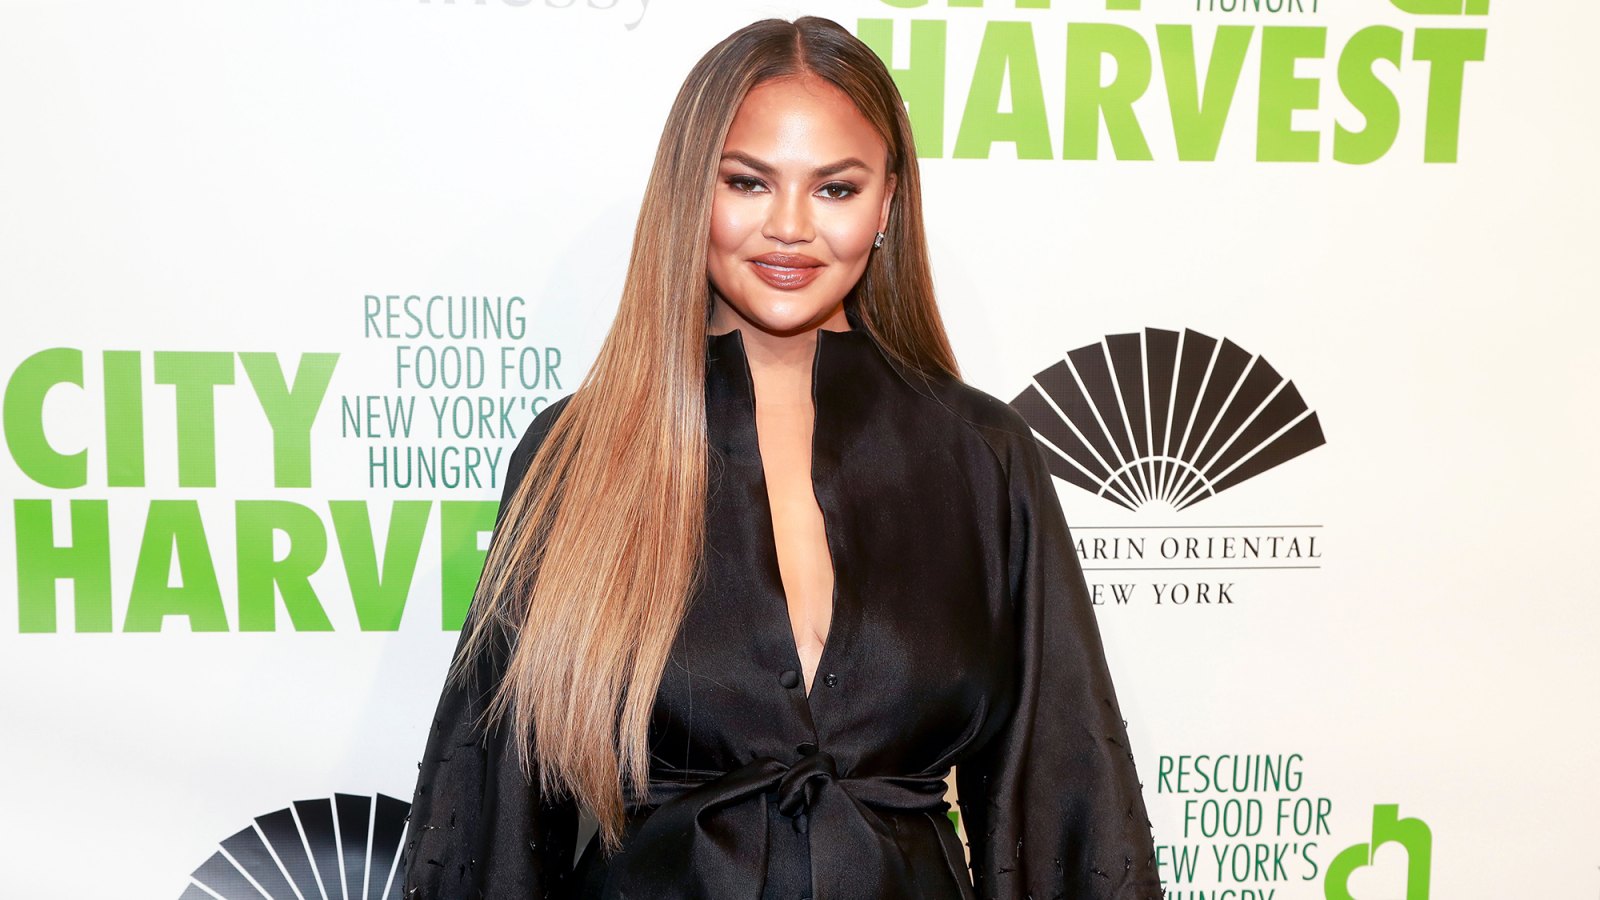 Chrissy Teigen Defends Bone Broth, Credits It For Helping Her After Kids